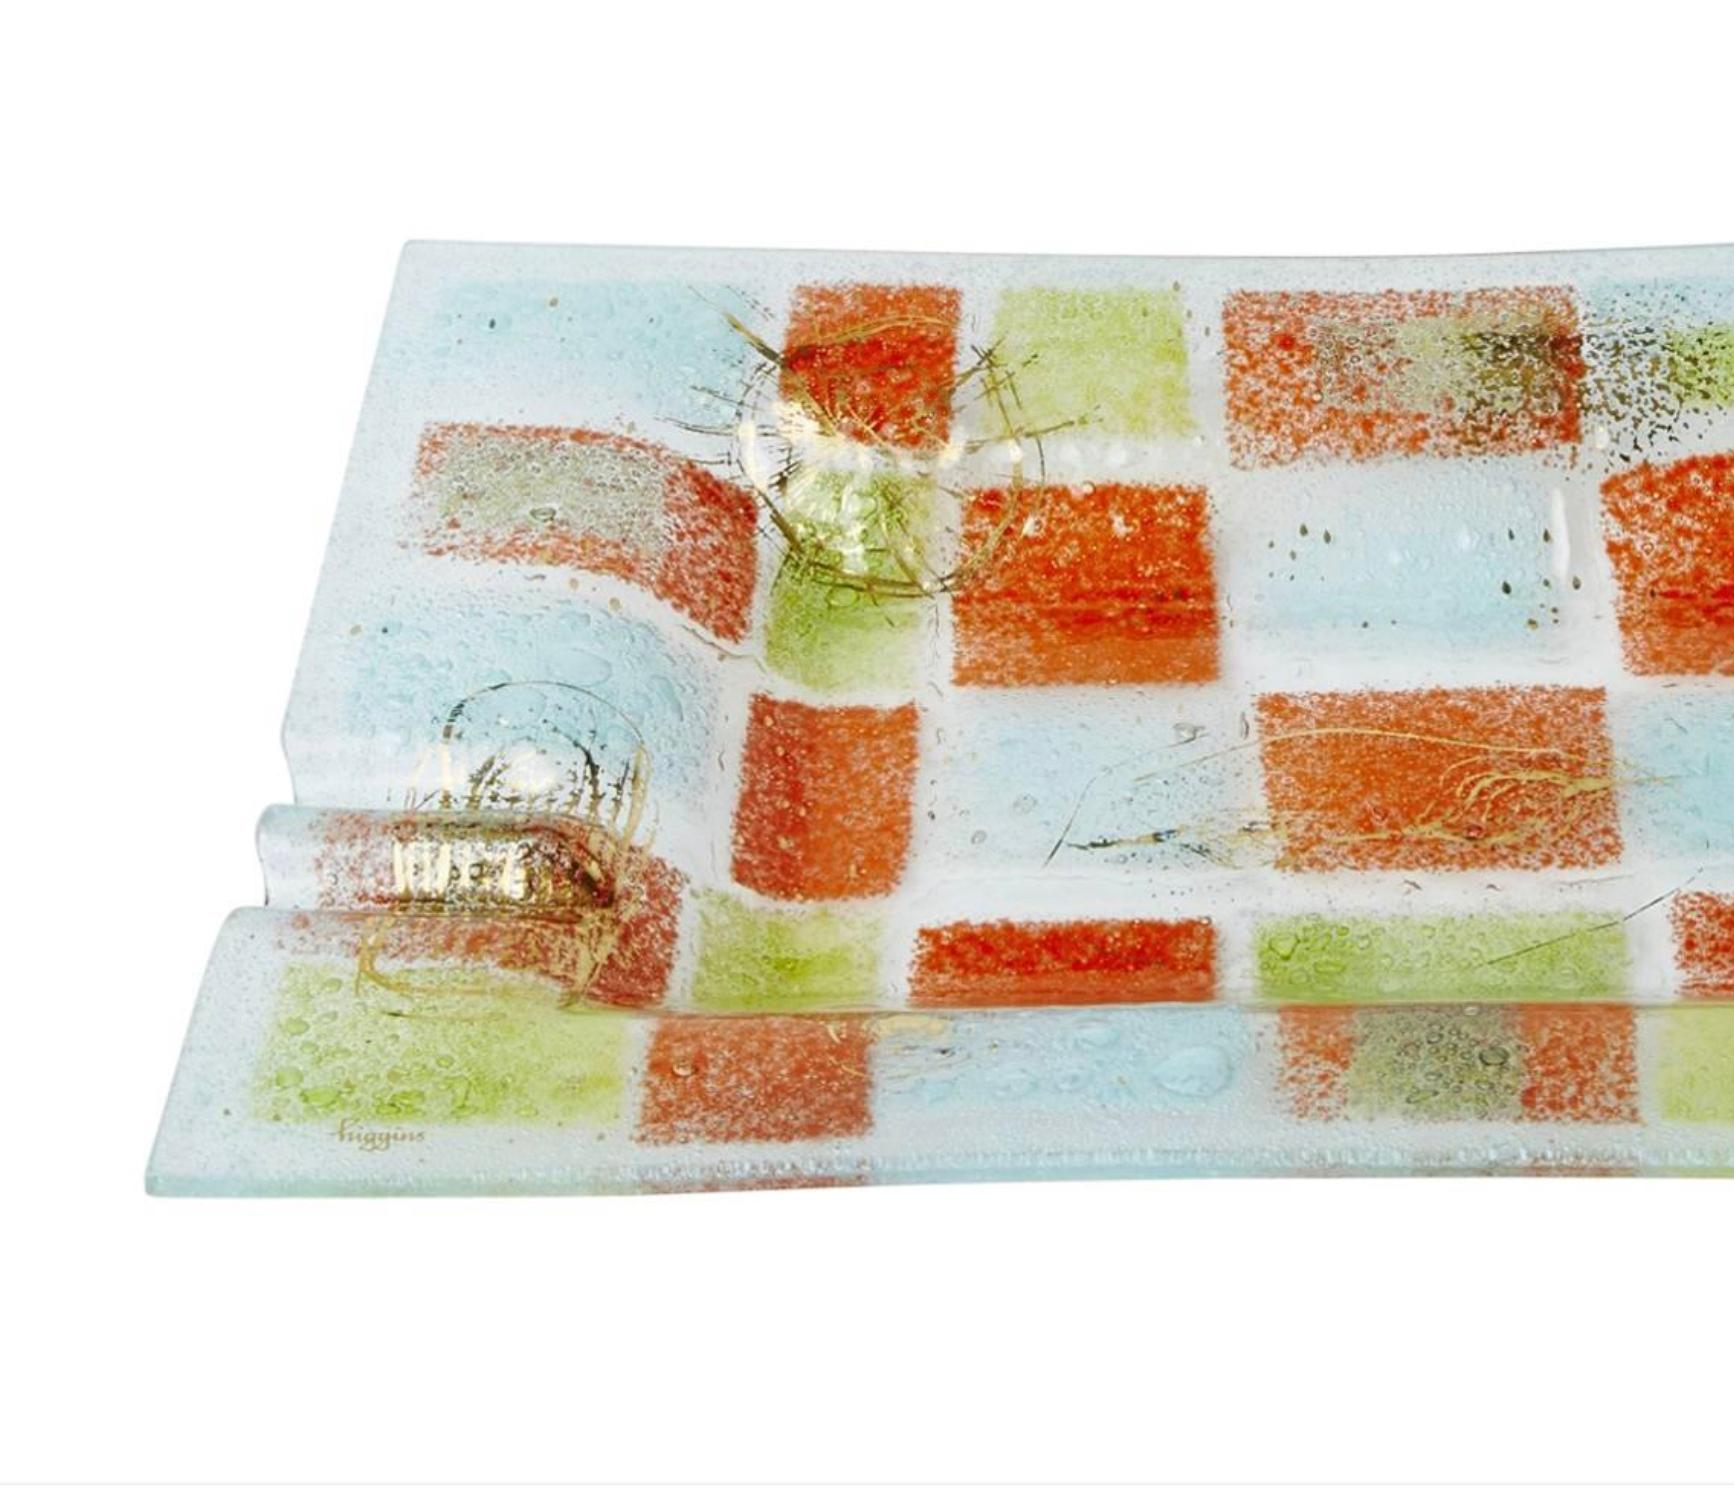 Mid-Century Modern Huge Fused Glass Square Detail Ashtray by Higgins Studio, circa 1950